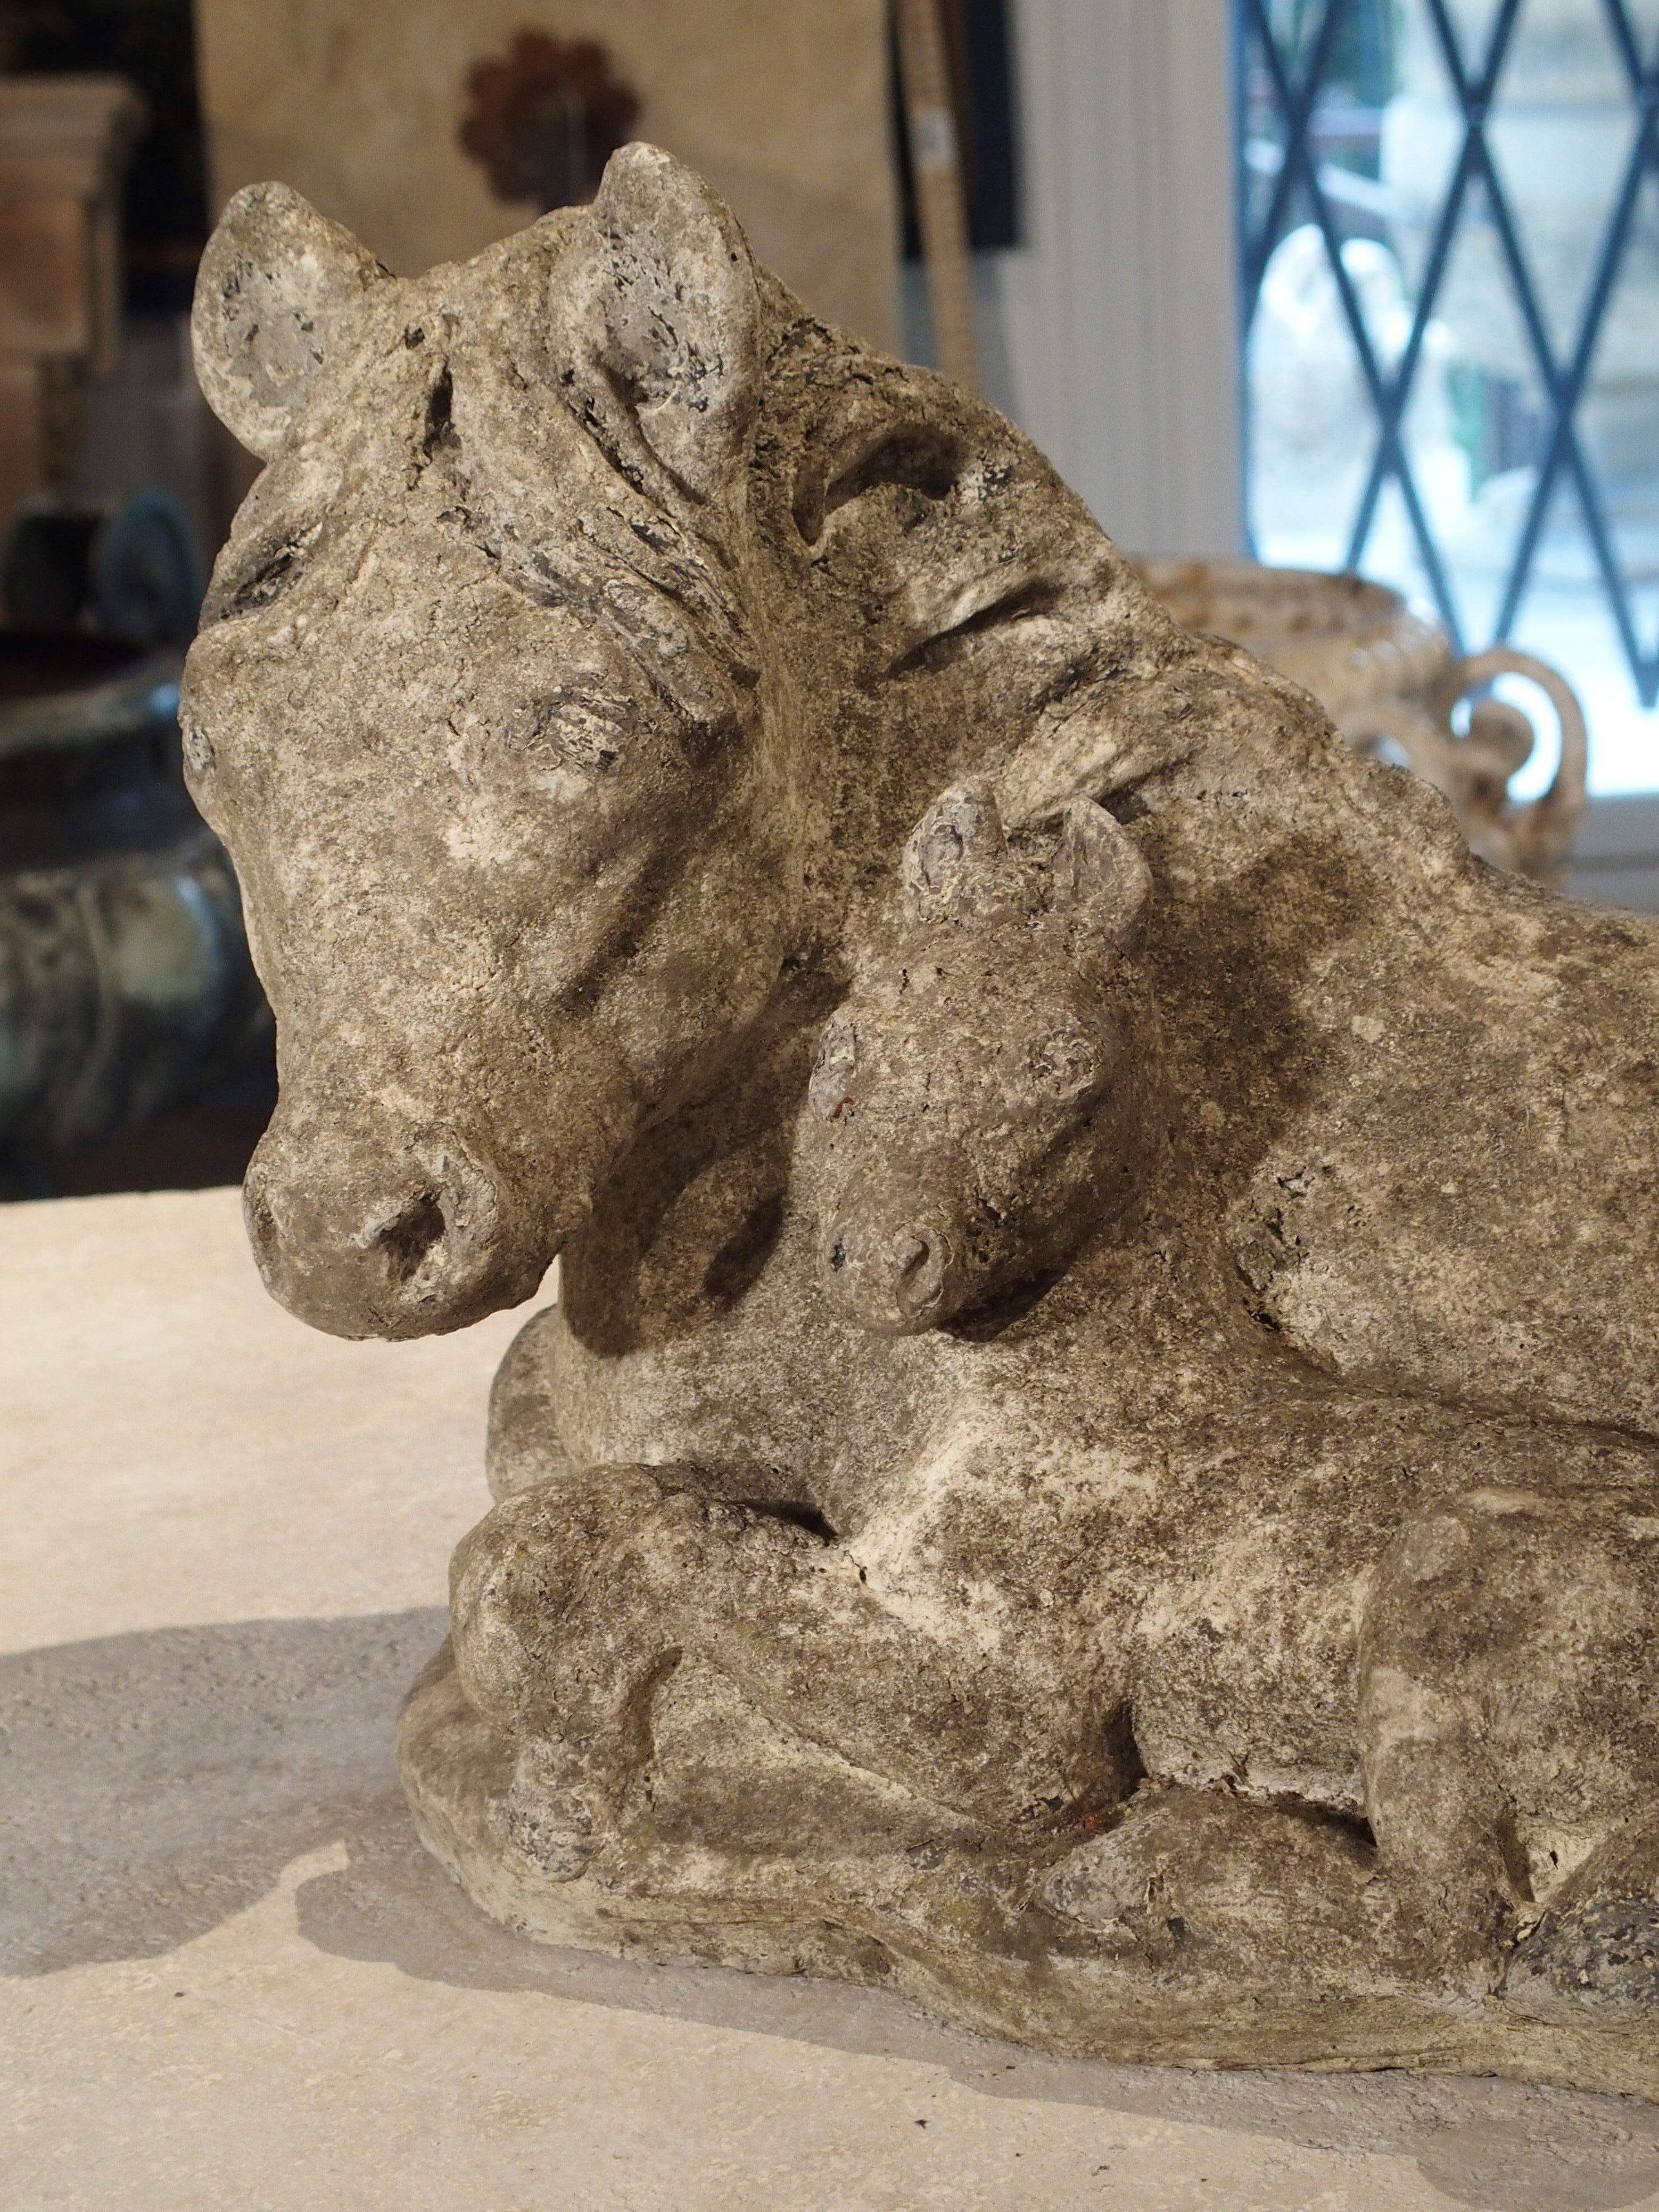 This unique little cast stone statue depicts two ponies curled up in a lying position. Both look forward attentively, with their front legs tucked beneath them. The statue has been outdoors for some time, and it has gained a nice natural patina that